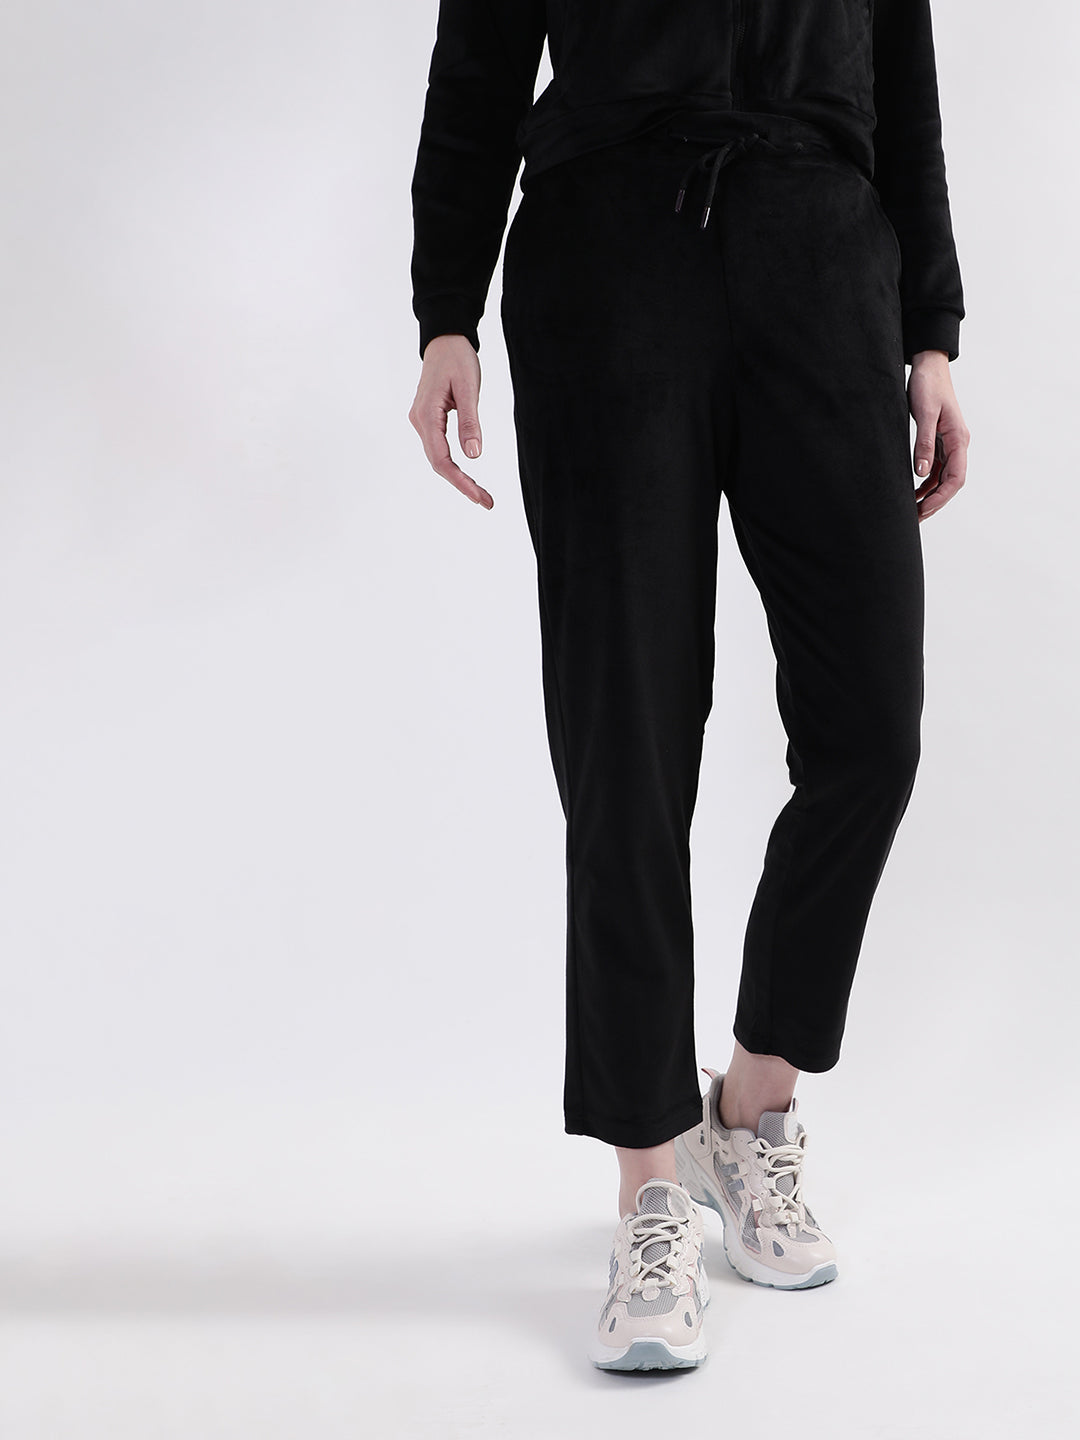 Buy Womens Ladies Oversized Pocket Baggy Cuffed Bottoms Fleece Joggers  Cuffed Joggers Online in India 